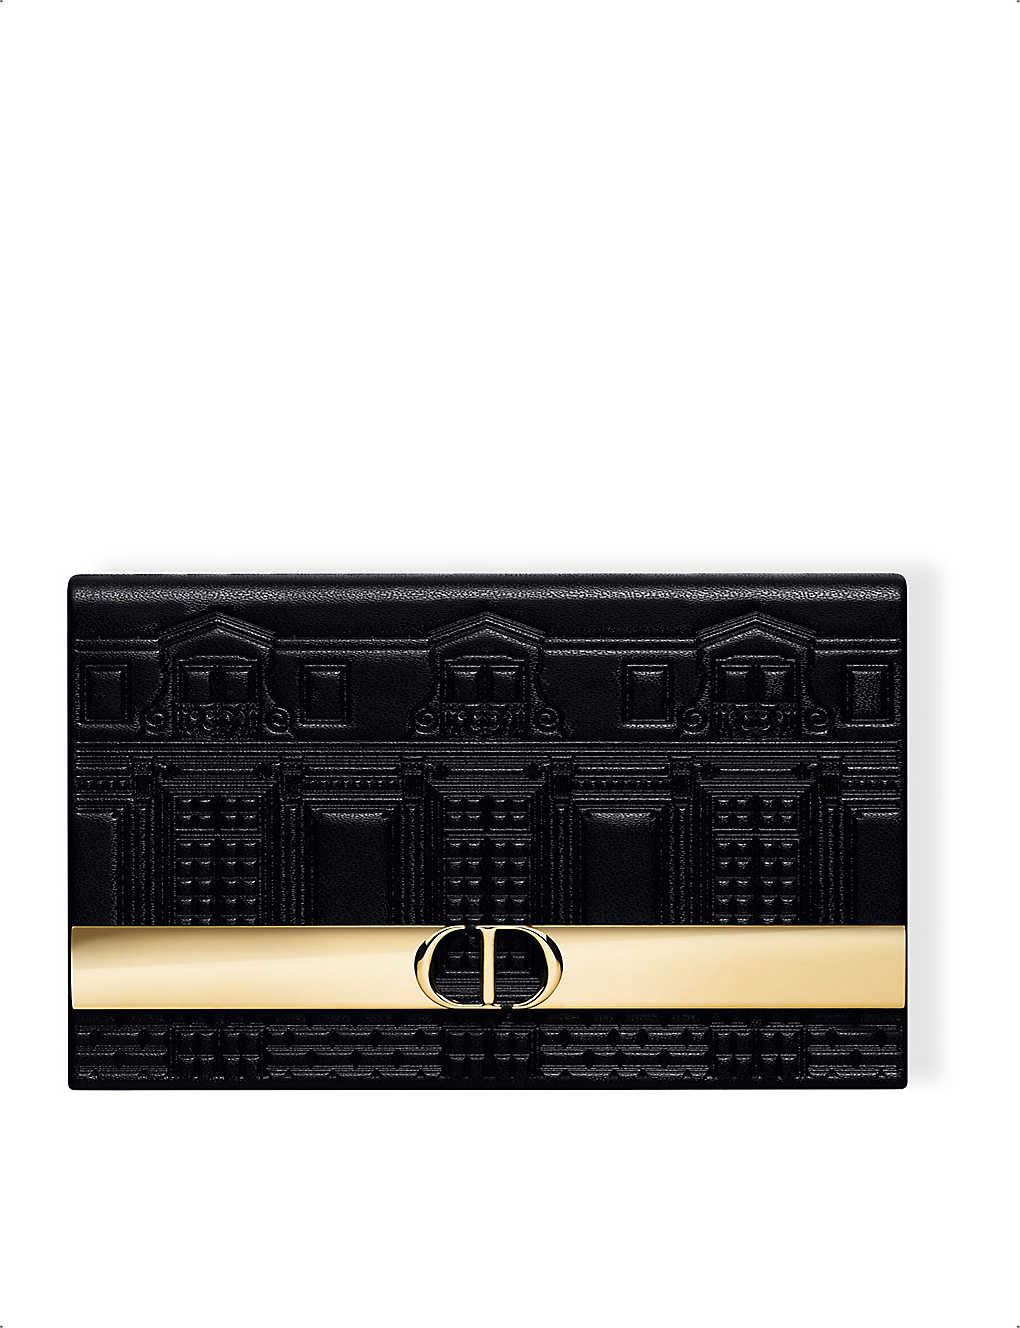 Dior Écrin Couture Limited Edition Eyeshadow Palette